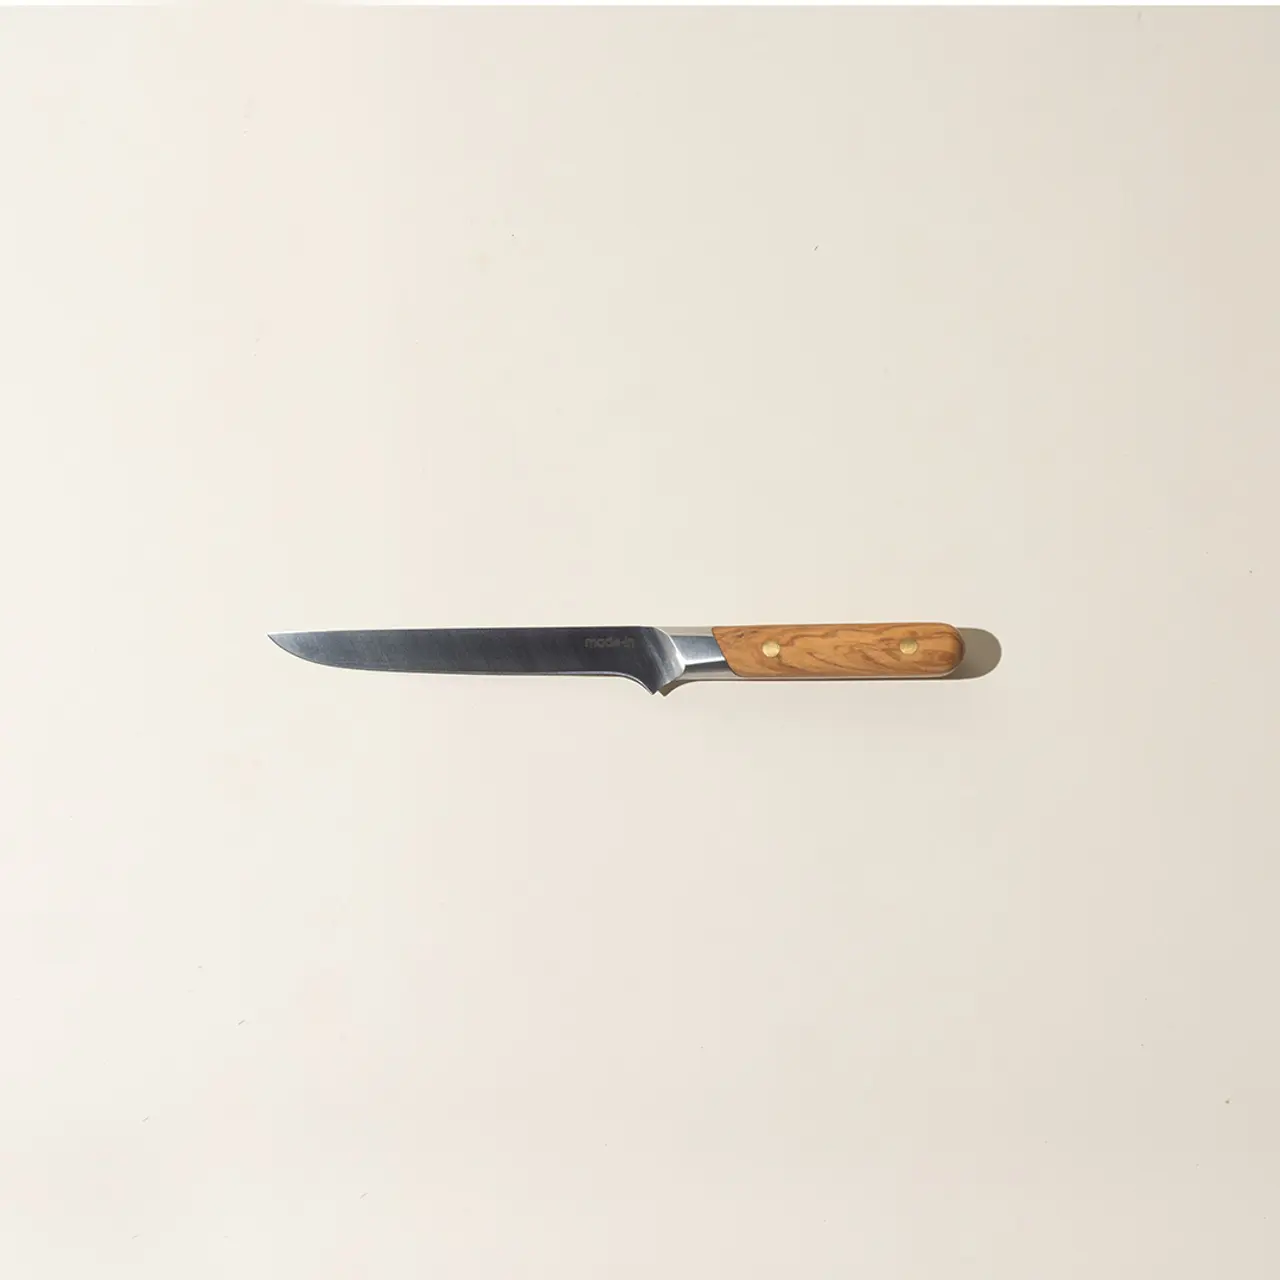 A kitchen knife with a wooden handle is centered against a plain background.